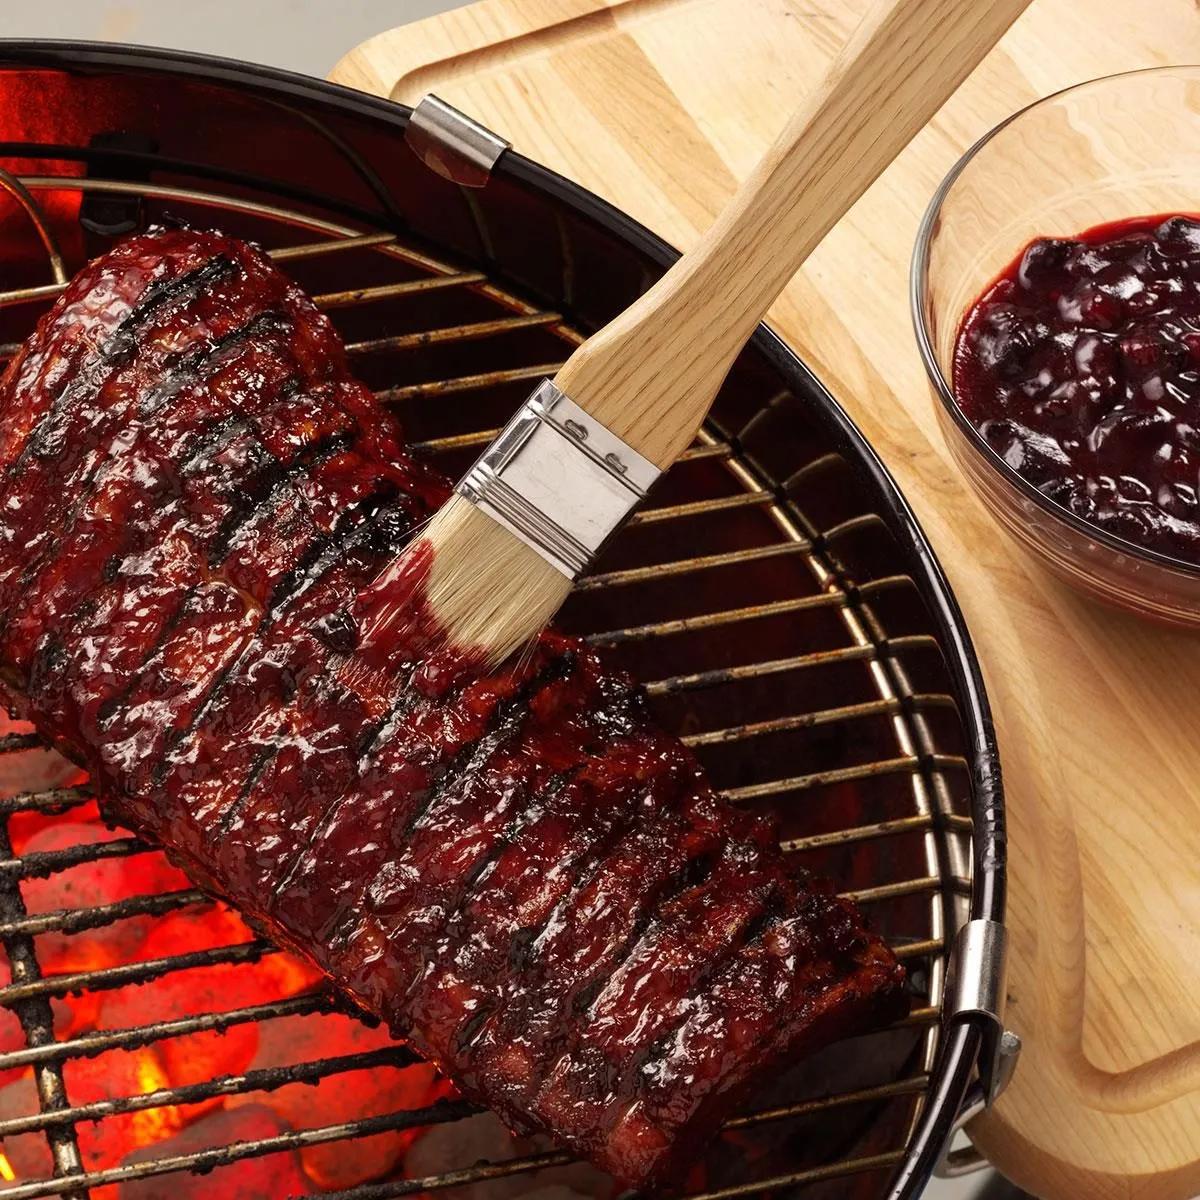 Cherry Barbecue Sauce Recipe: How to Make It